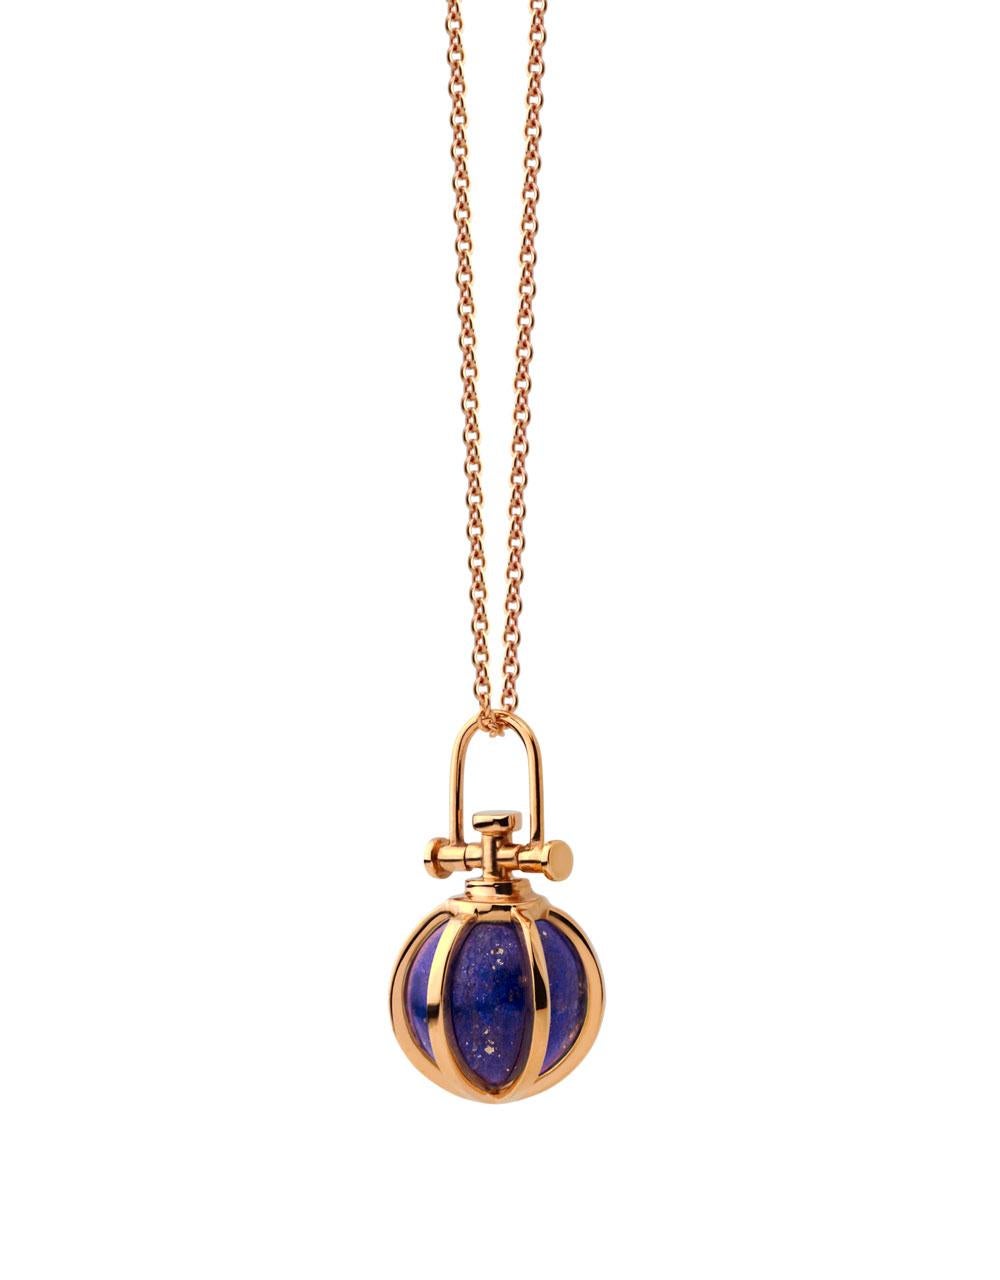 Rebecca Li designs mindfulness. 
This dainty orb necklace is from her Crystal Ball Collection.
Lapis Lazuli means Wisdom & Creativity.

Pendant:
Metal Type: 18K Rose Gold
Gemstone: Lapis Lazuli
Pendant Size: 9 mm W * 9 mm D * 17 mm H
Gemstone Size: